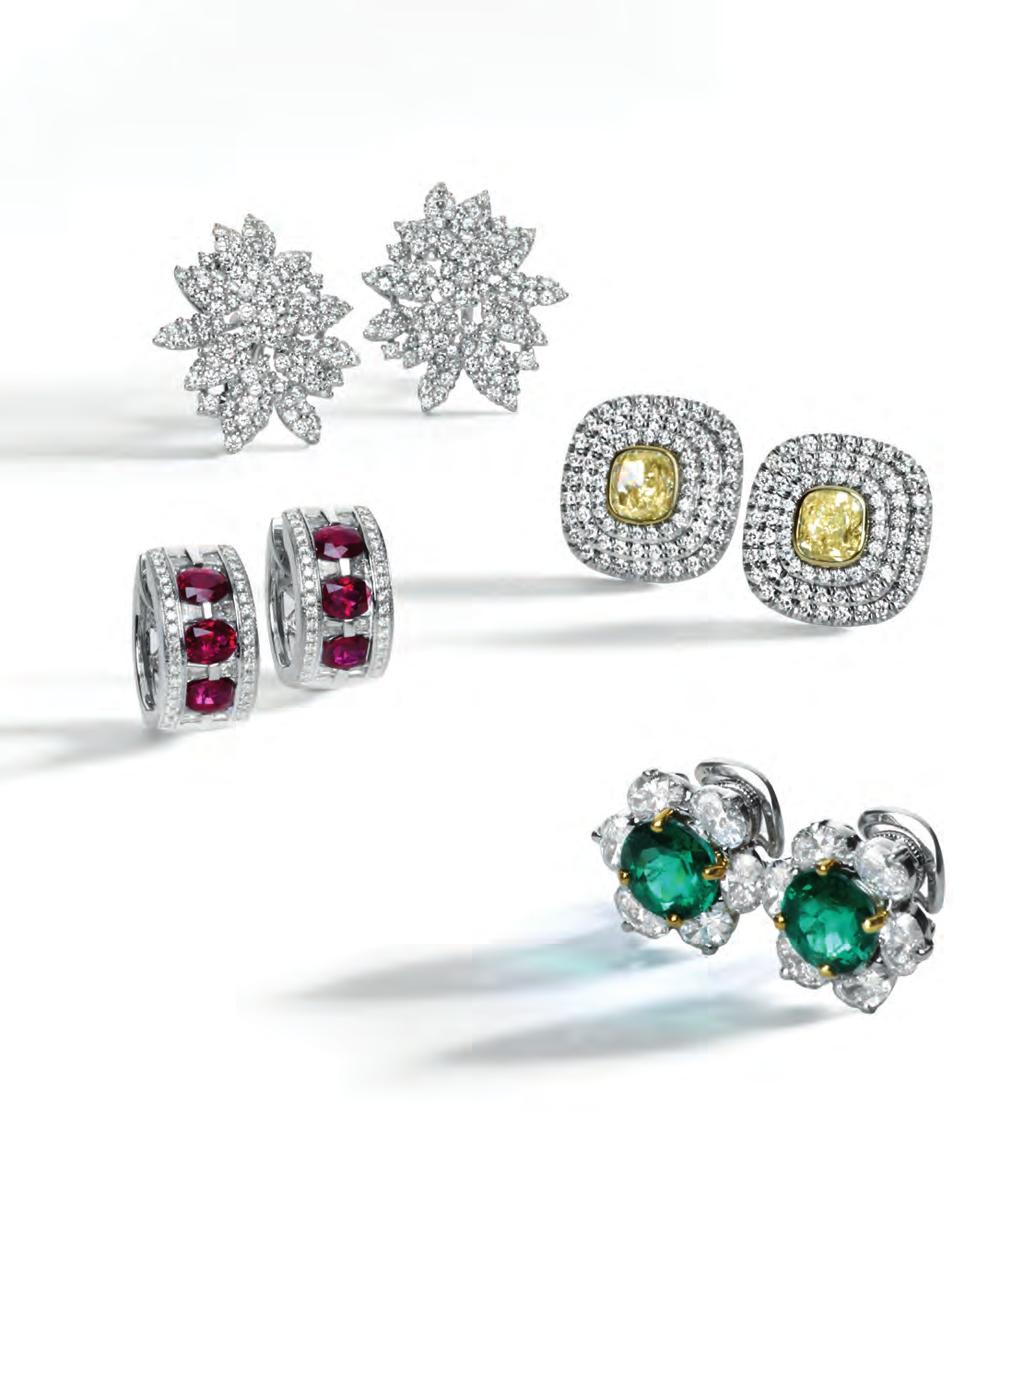 EVERY DAY. Diamond earrings are an essential piece in your jewelry wardrobe.